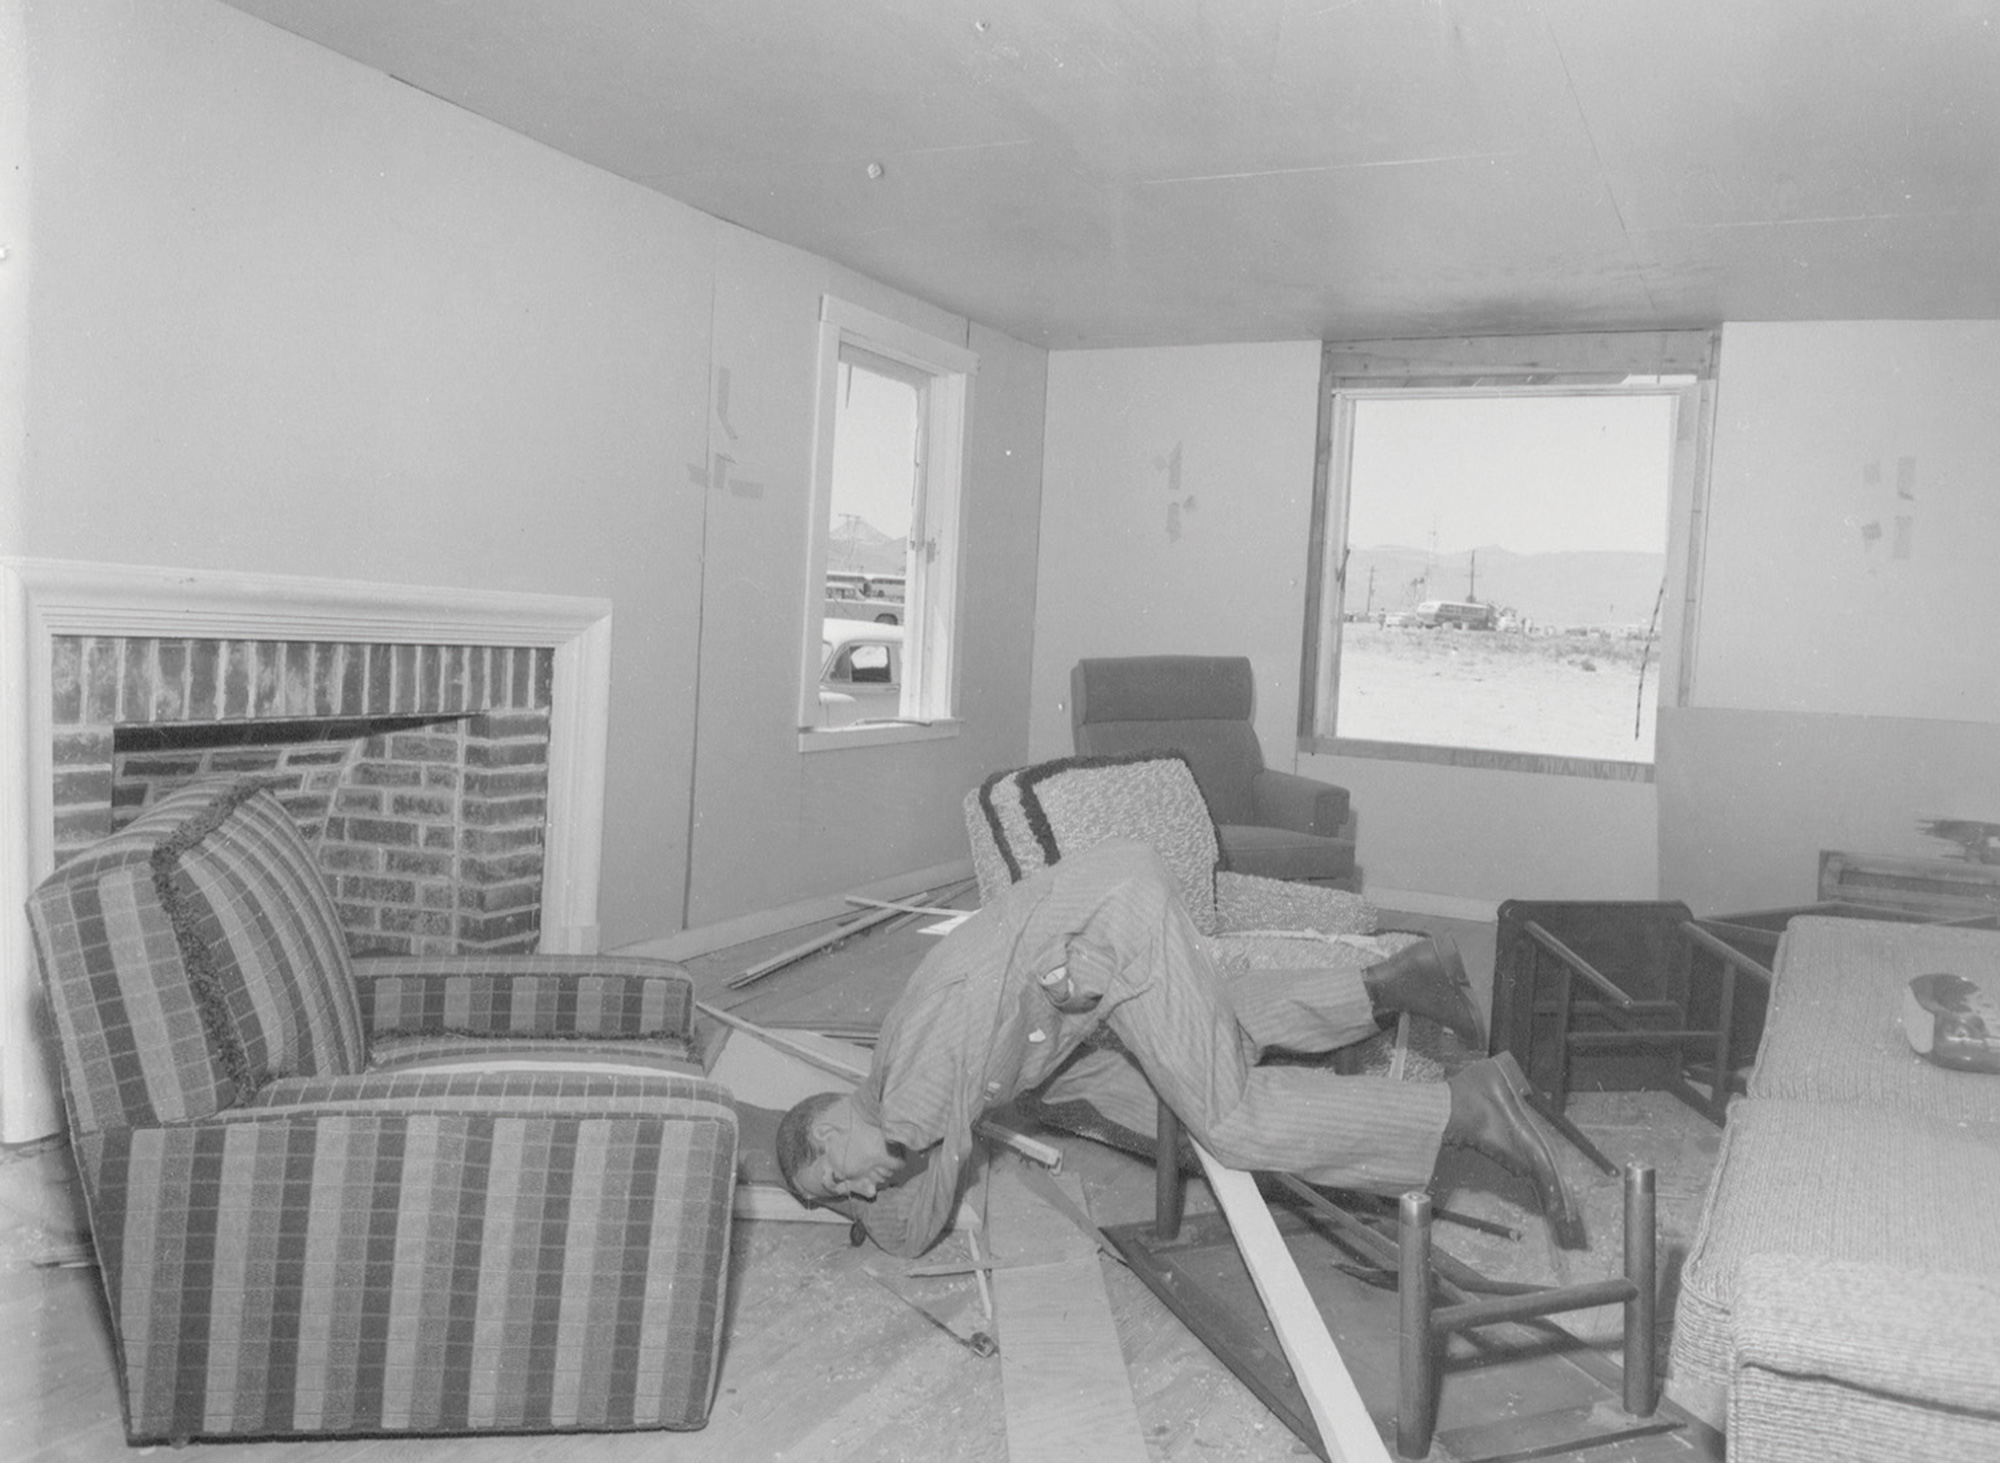 A photograph from Operation Cue depicting a damaged mannequin thrown to the ground as a result of the test explosion.